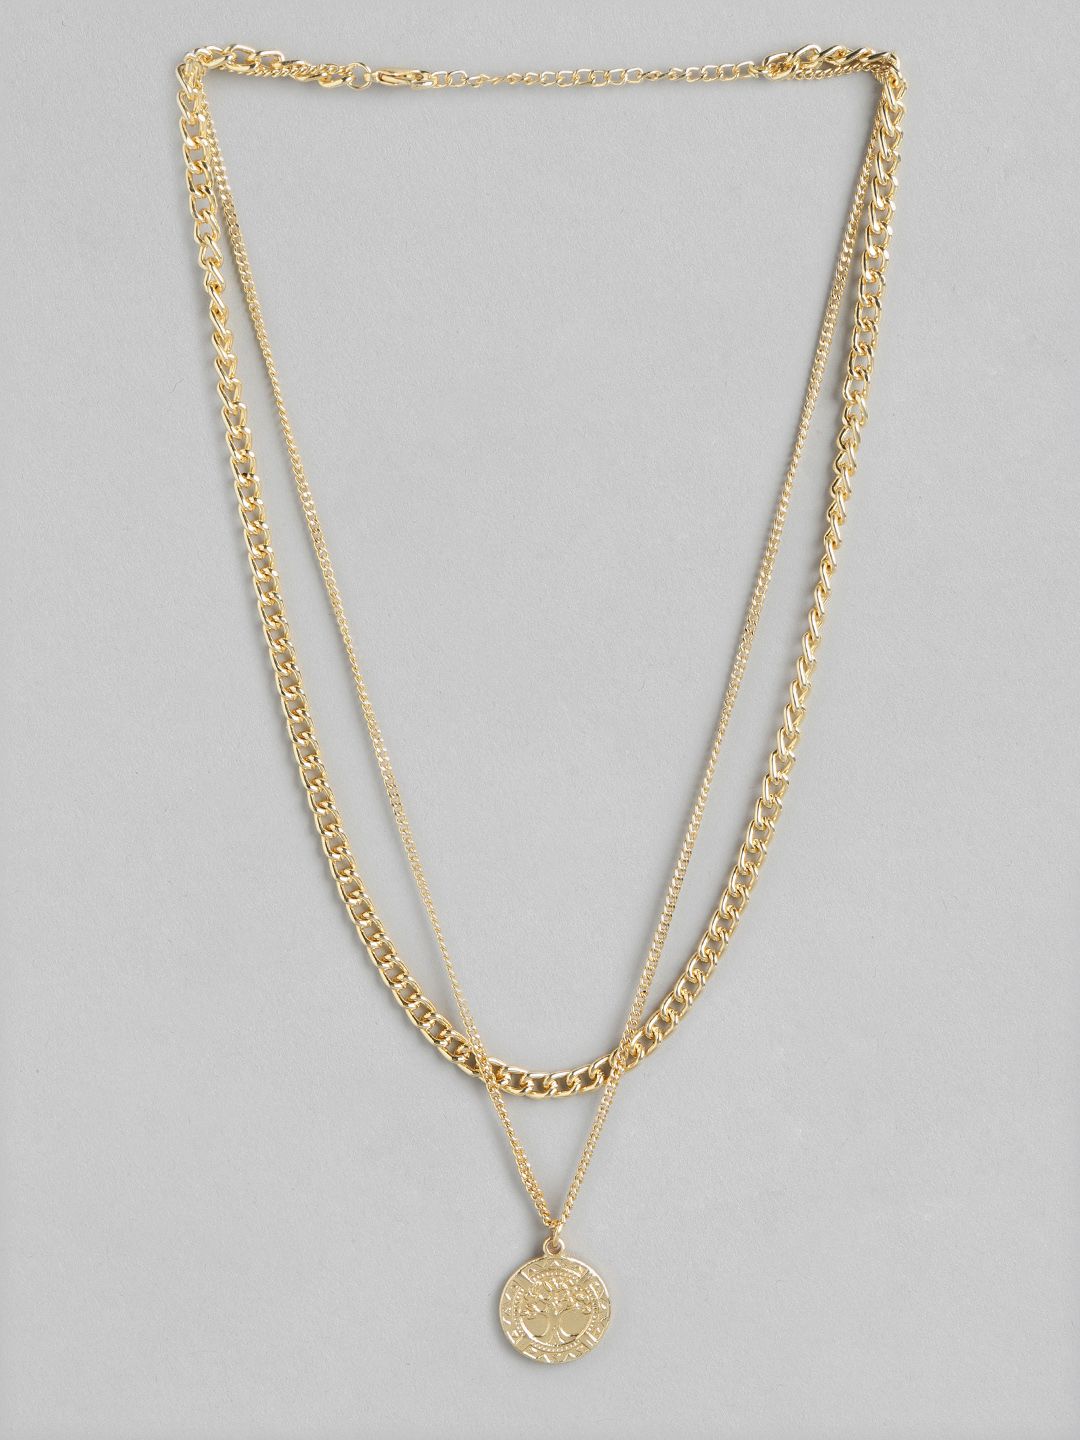 DressBerry Gold-Toned Layered Necklace Price in India